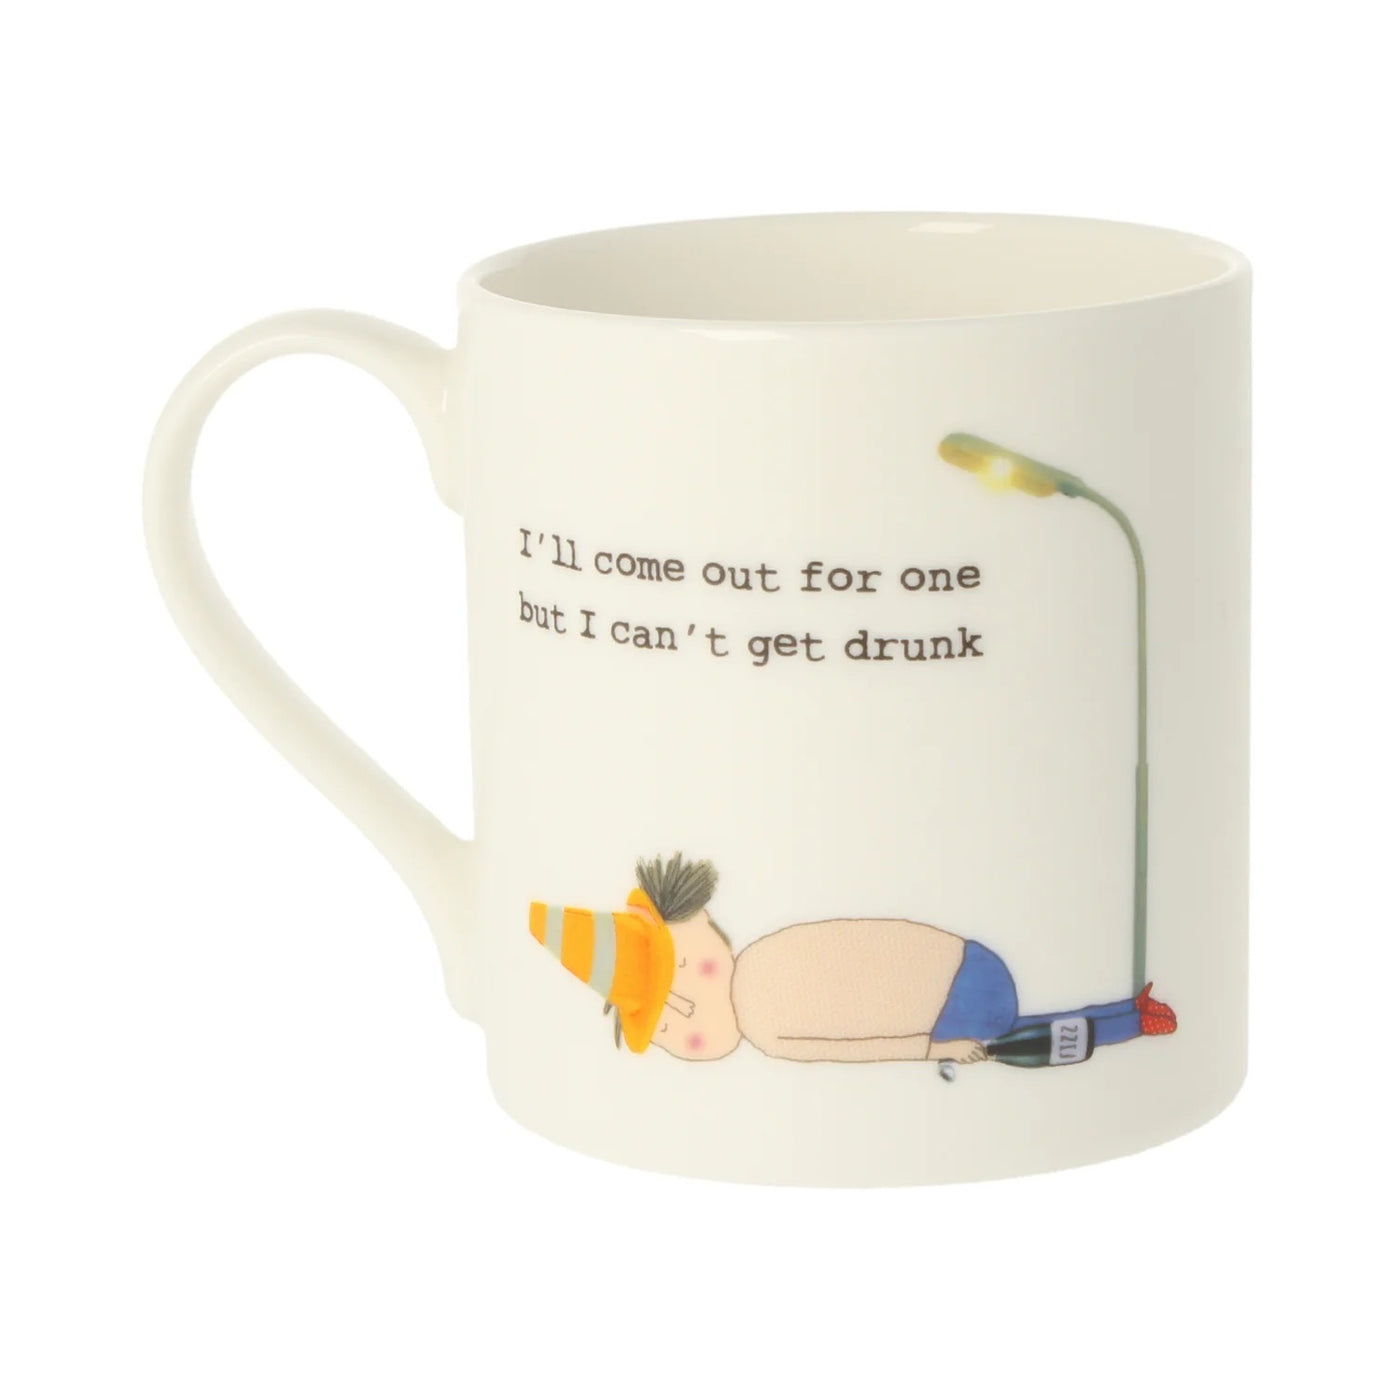 Rosie Made a Thing Mug - I'll Come For One